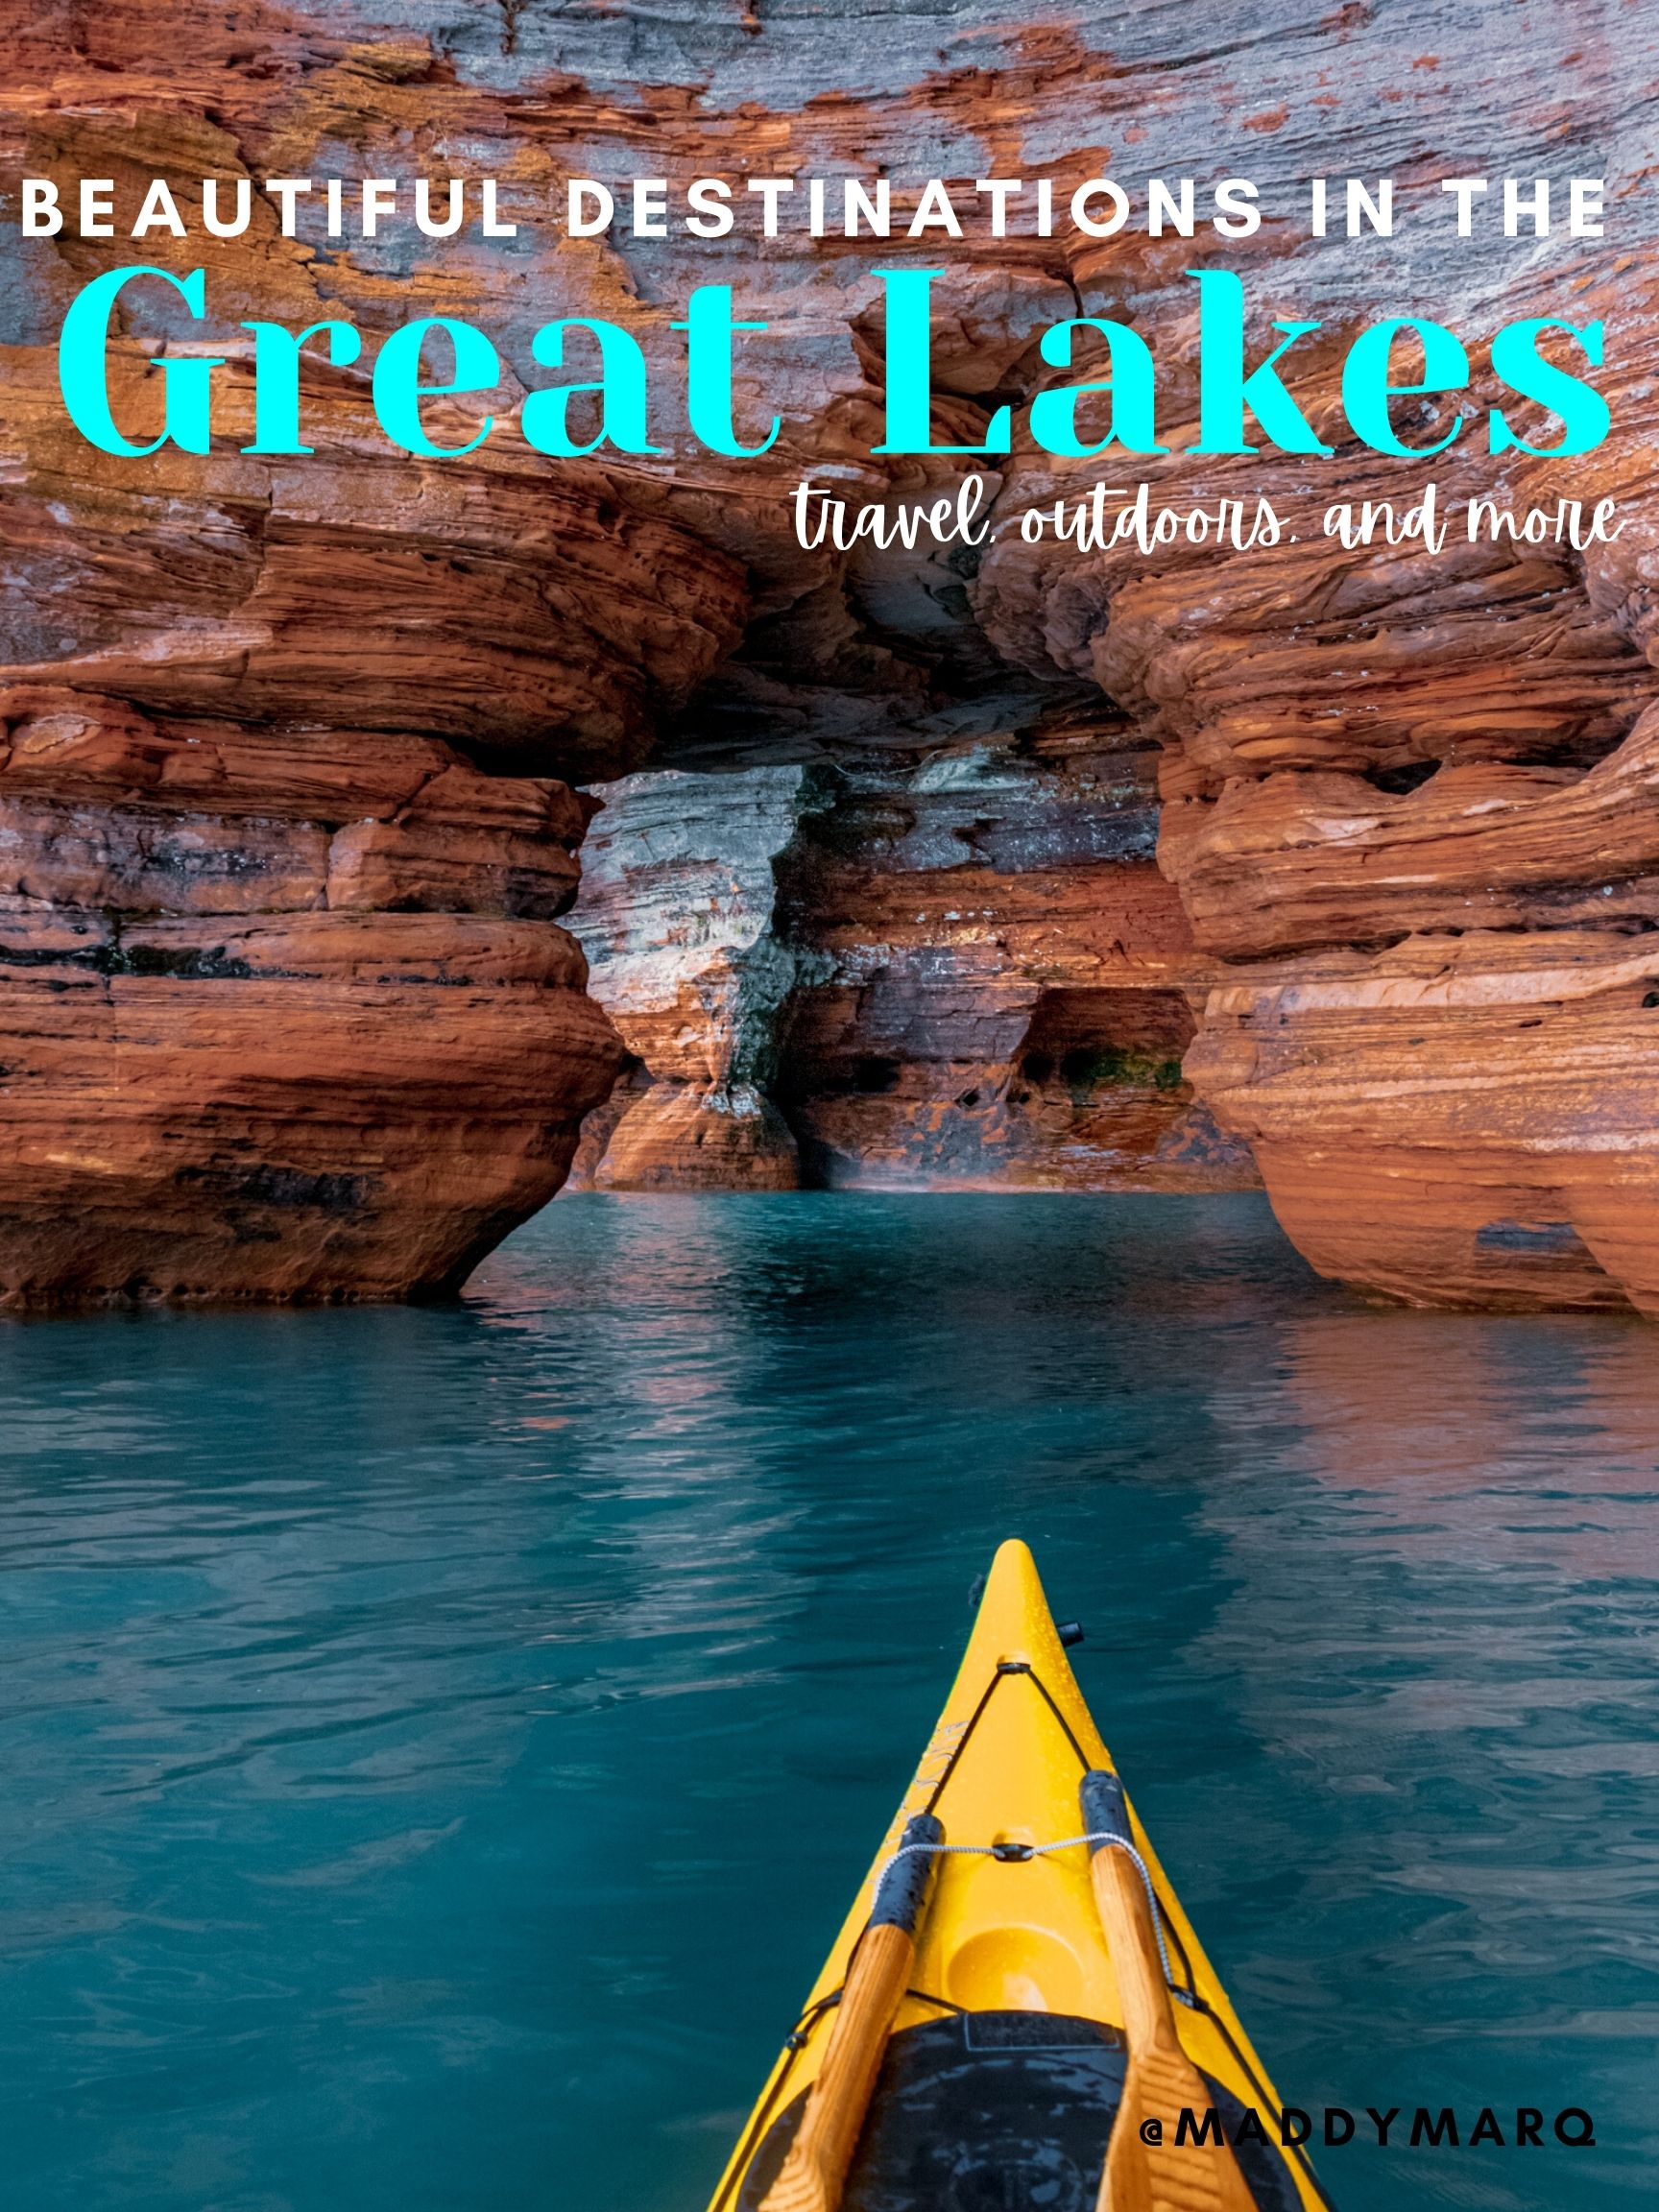 great lakes tourism guide